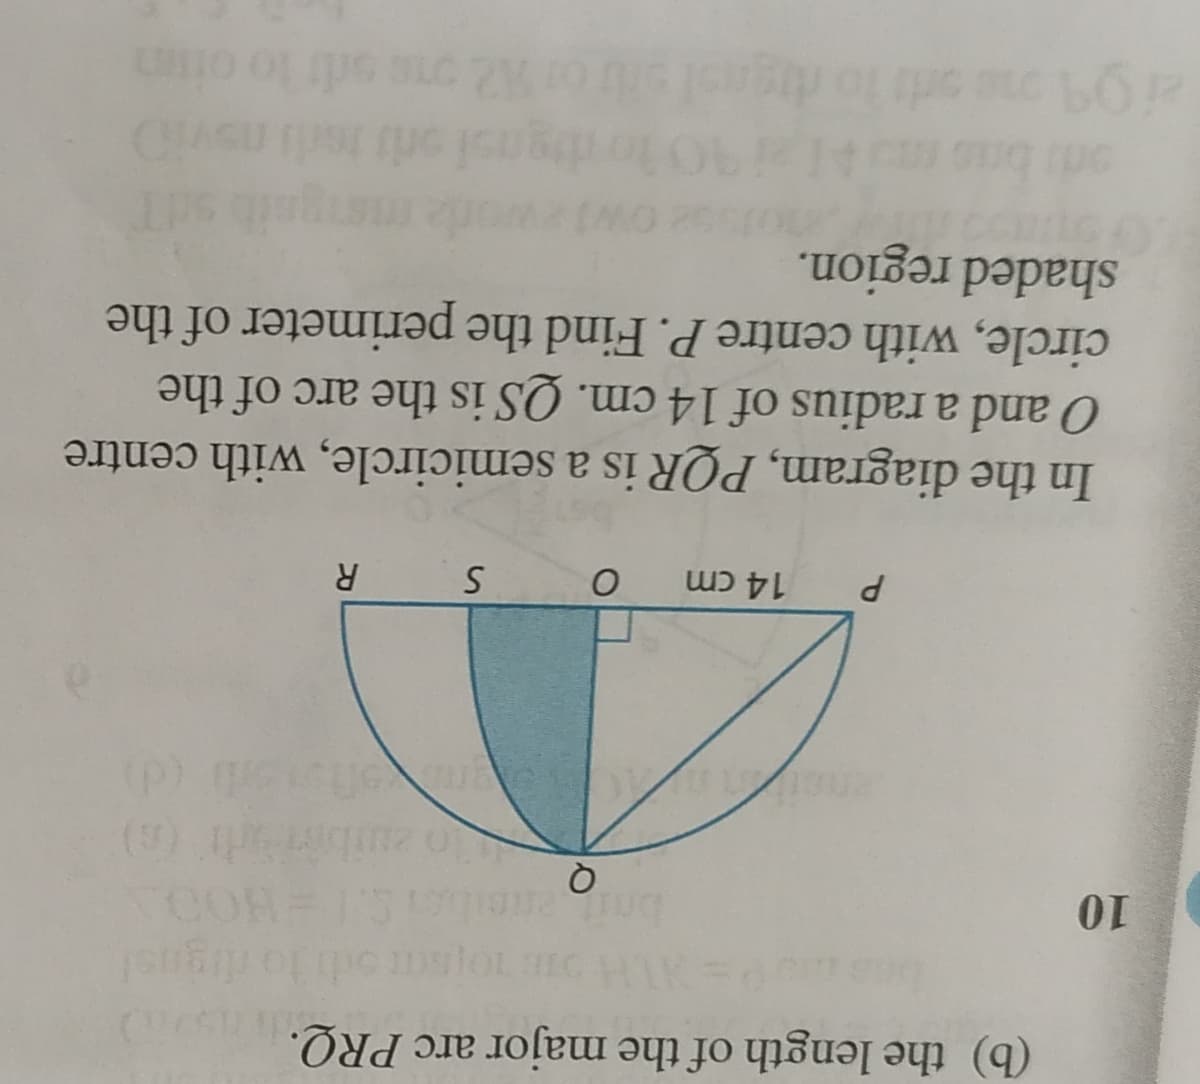 (b) the length of the major arc PRQ.
COR
(9)
bnitaneil
n zuibirrl (6)
ut
P.
14 cm
R
In the diagram, PQR is a semicircle, with centre
O and a radius of 14 cm. QS is the arc of the
circle, with centre P. Find the perimeter of the
shaded region.
